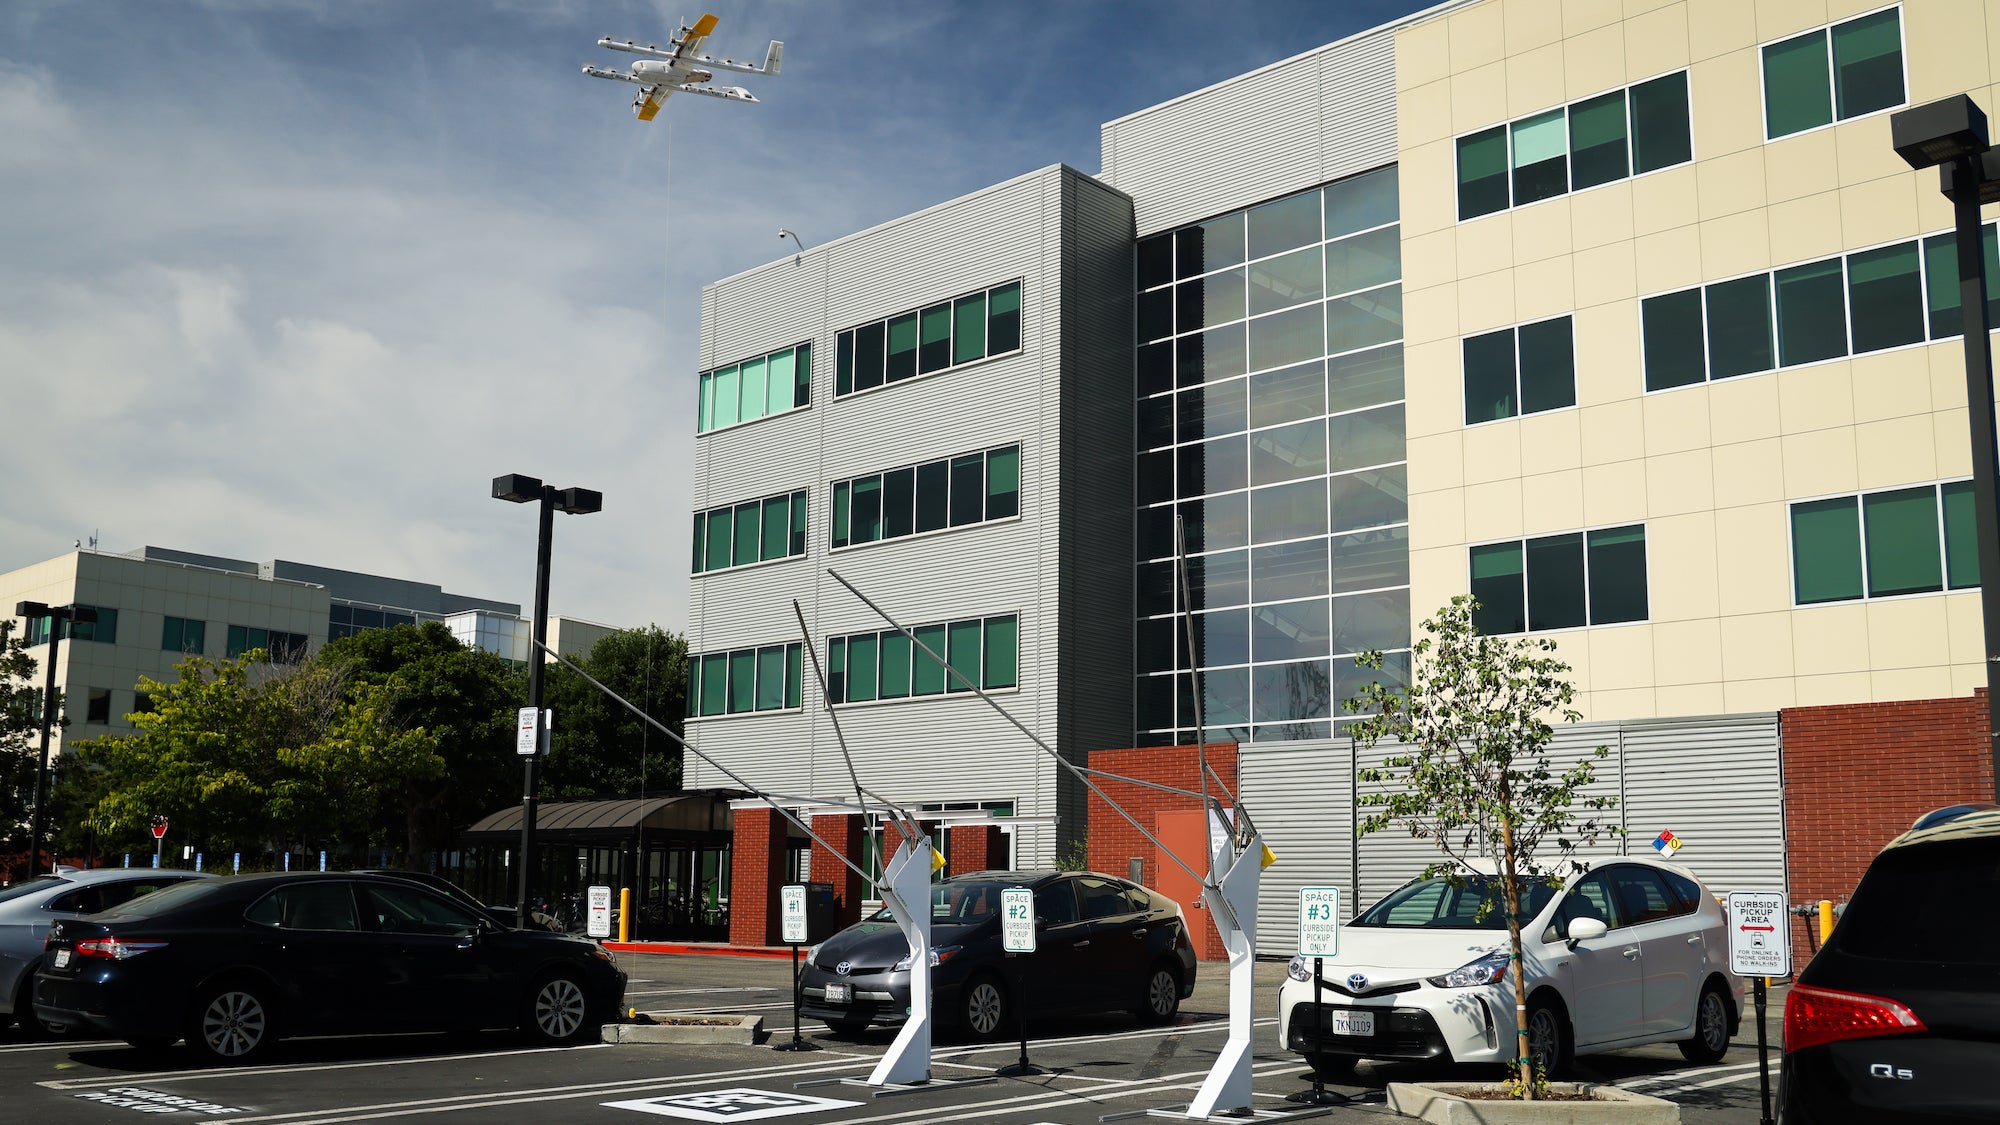 Save a parking spot for Wing’s slick new ‘AutoLoader’ for drones